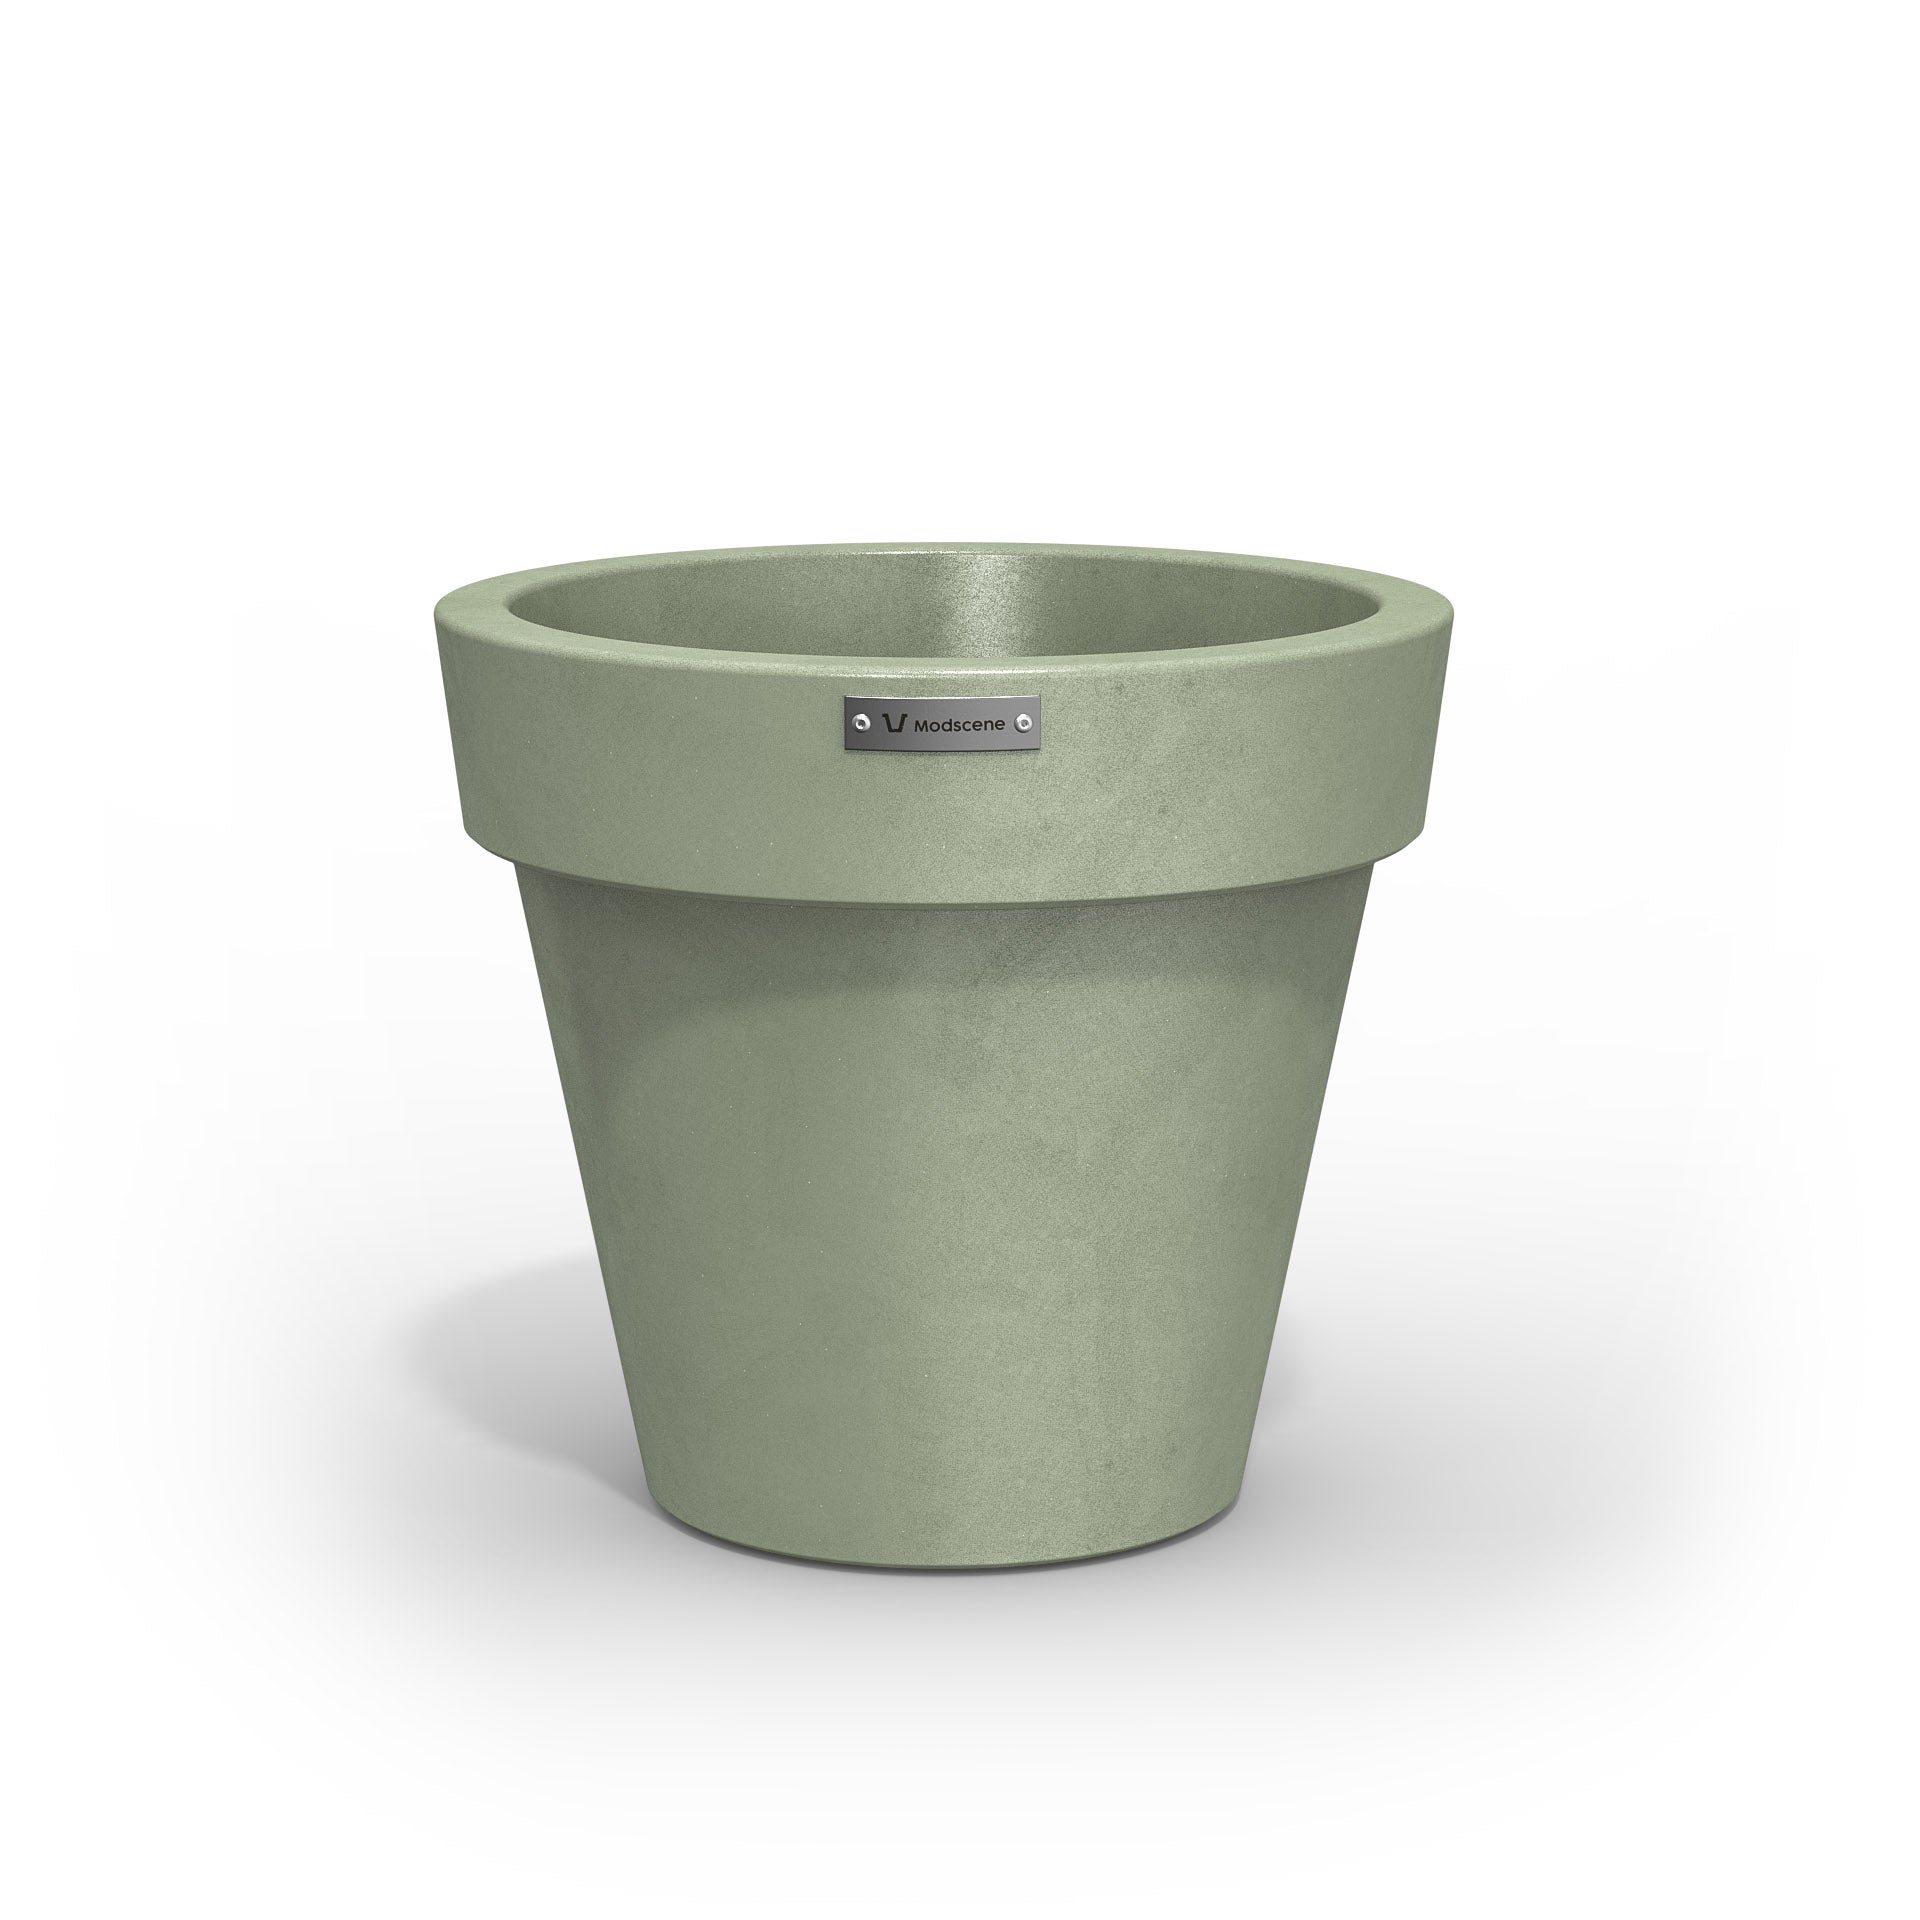 A Modscene plastic planter pot in a moss green colour with a concrete look.